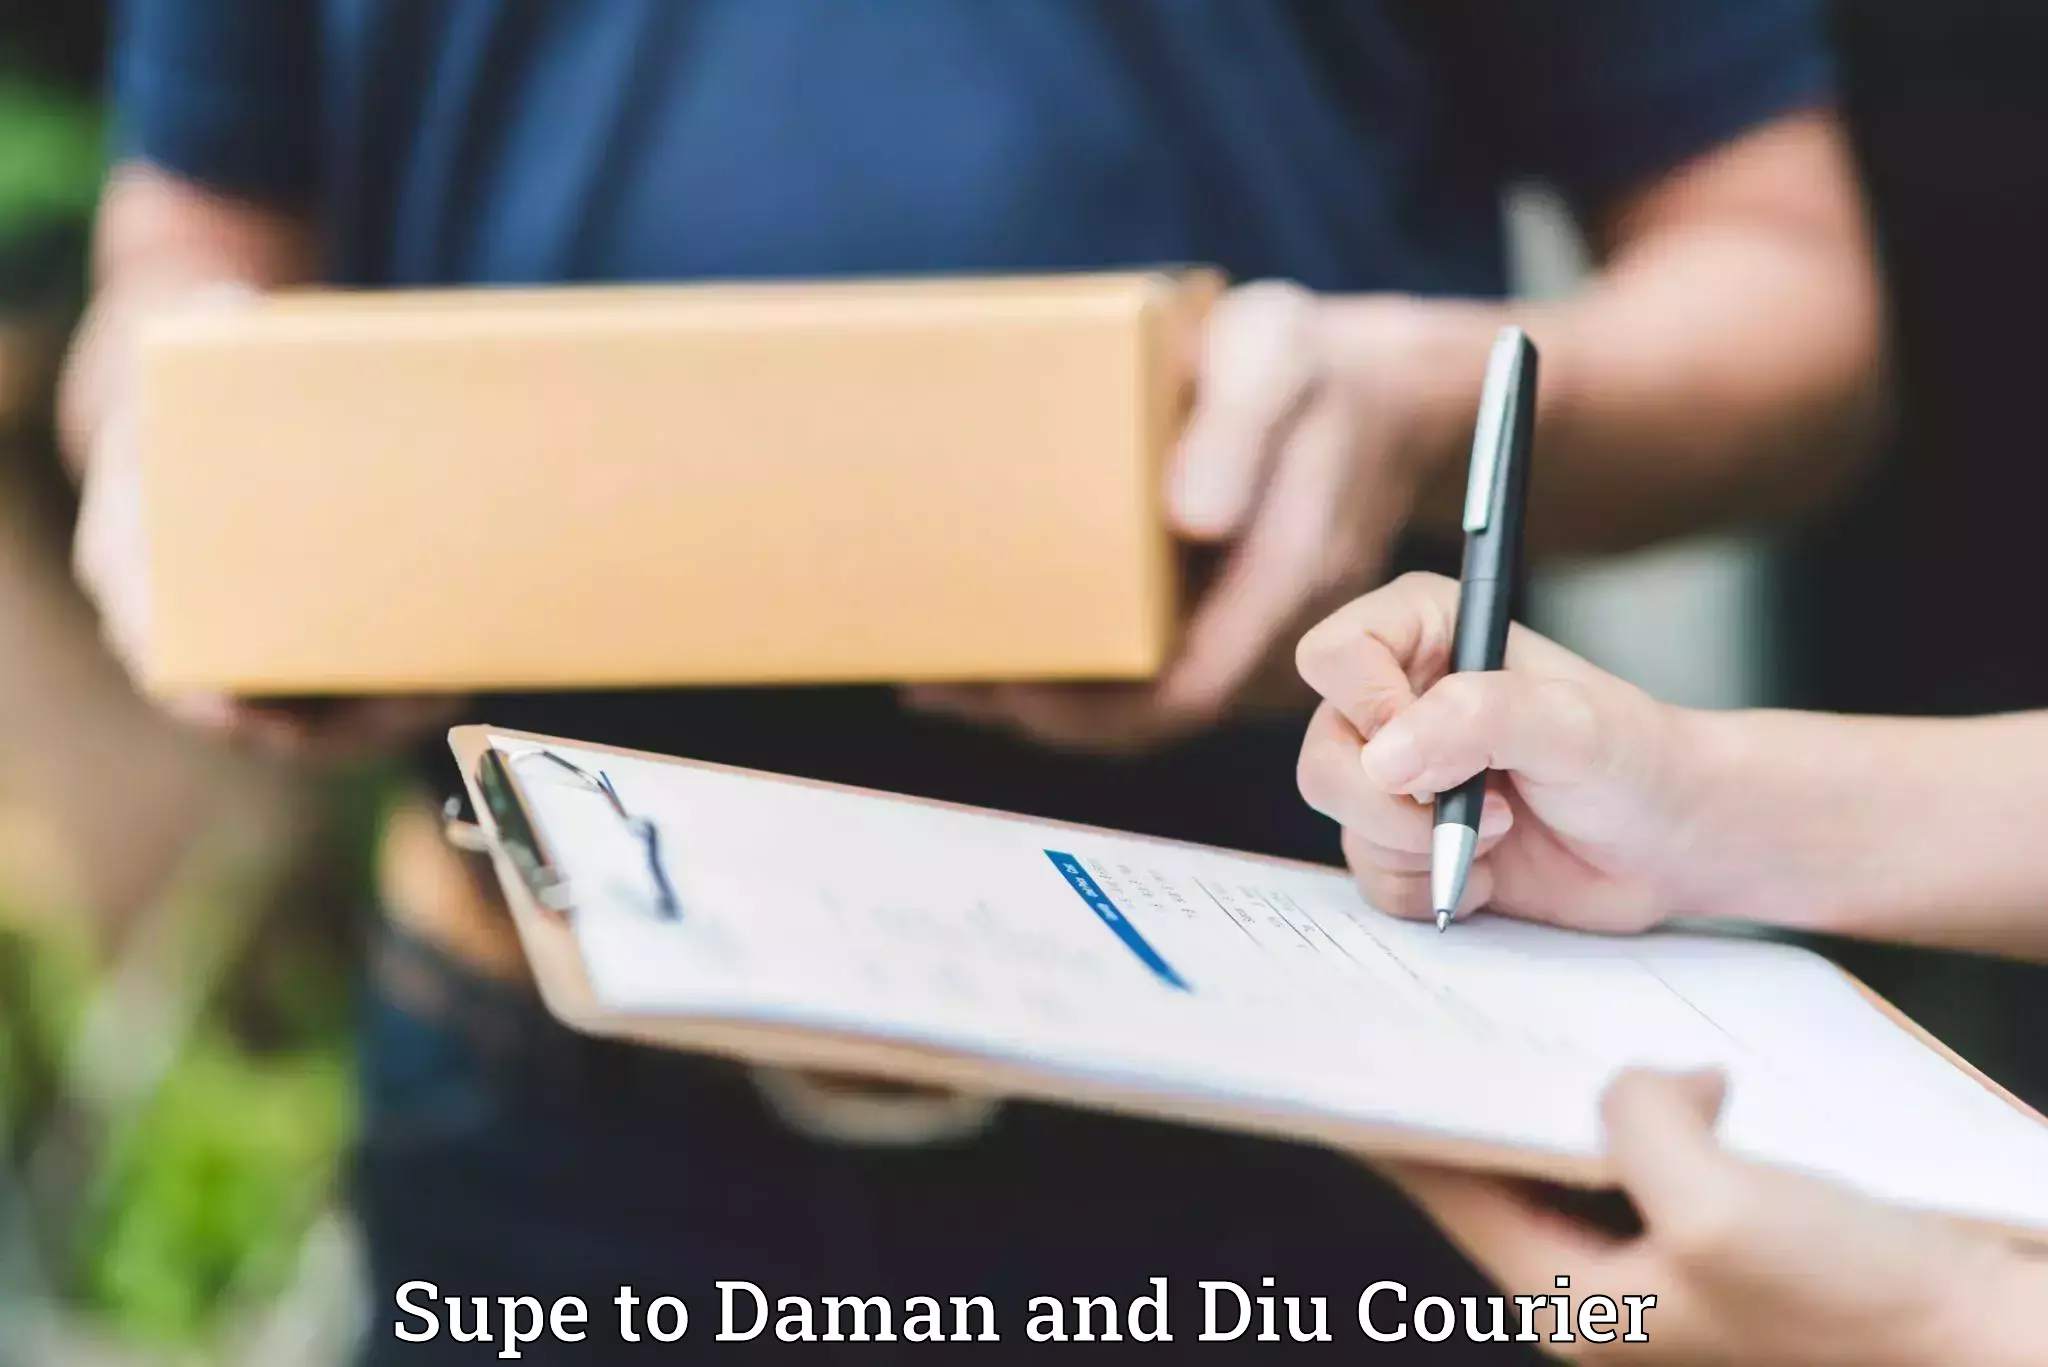 Online luggage shipping booking Supe to Daman and Diu